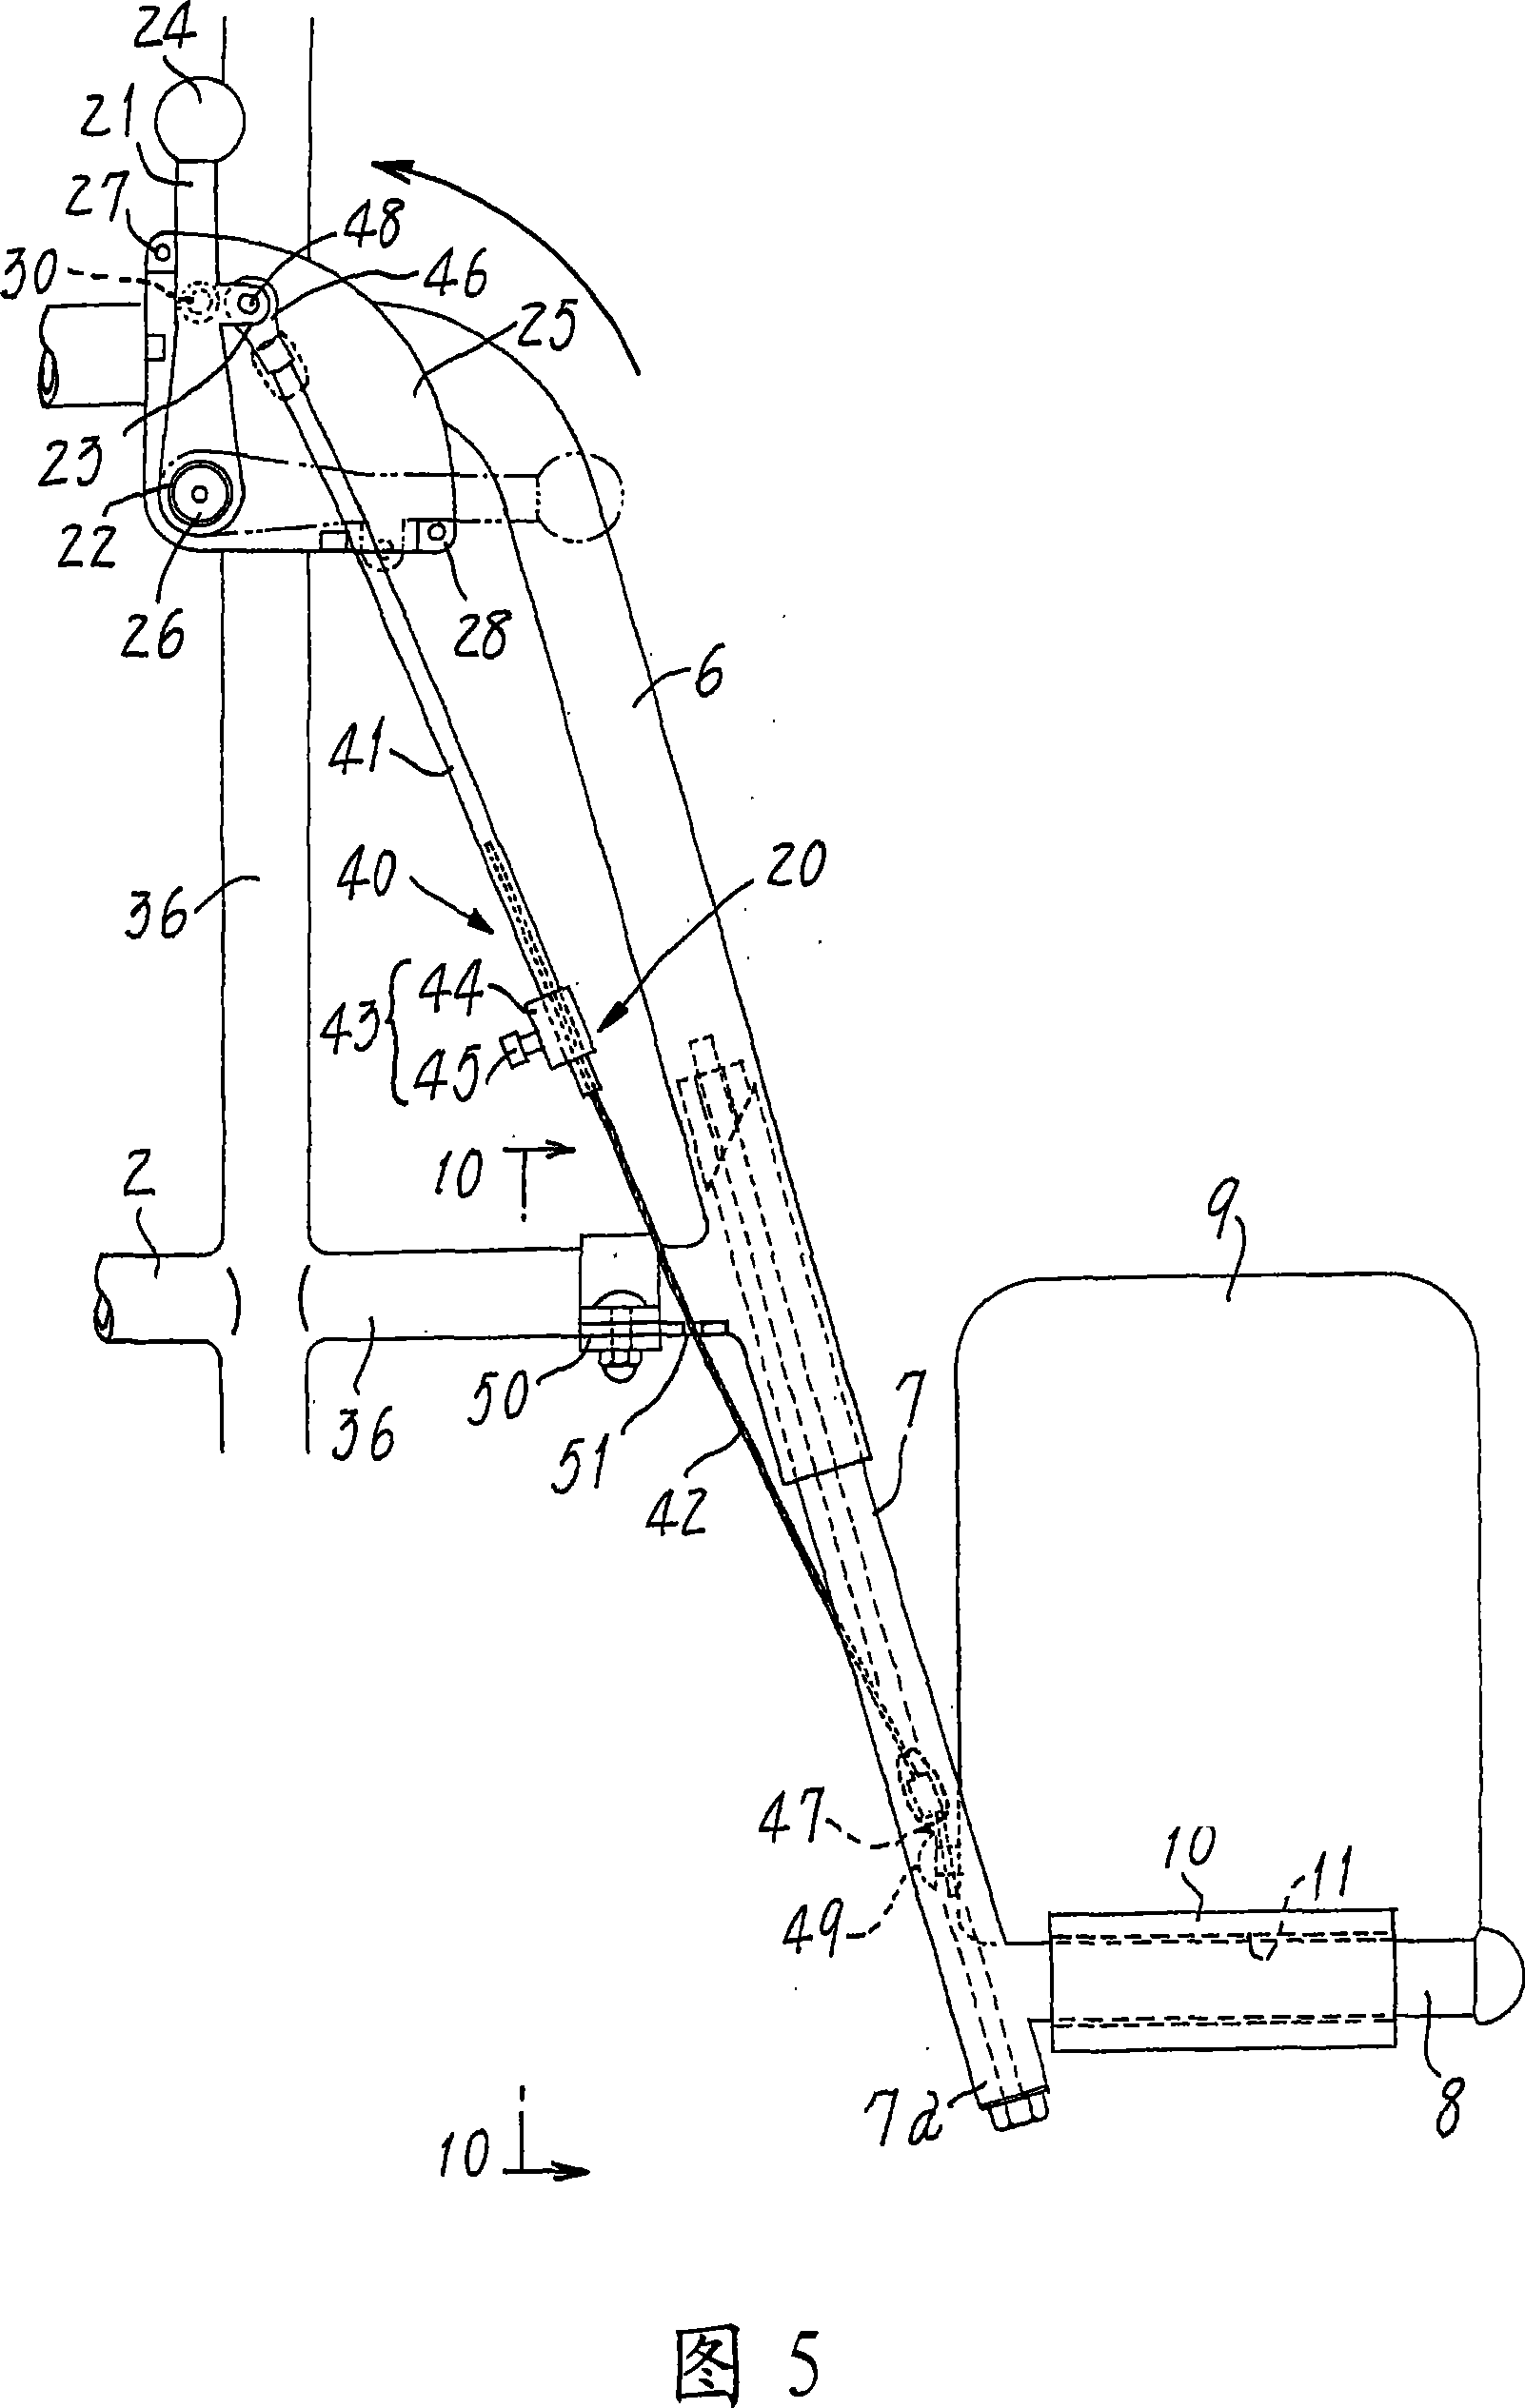 Manipulation device for wheelchair footrests